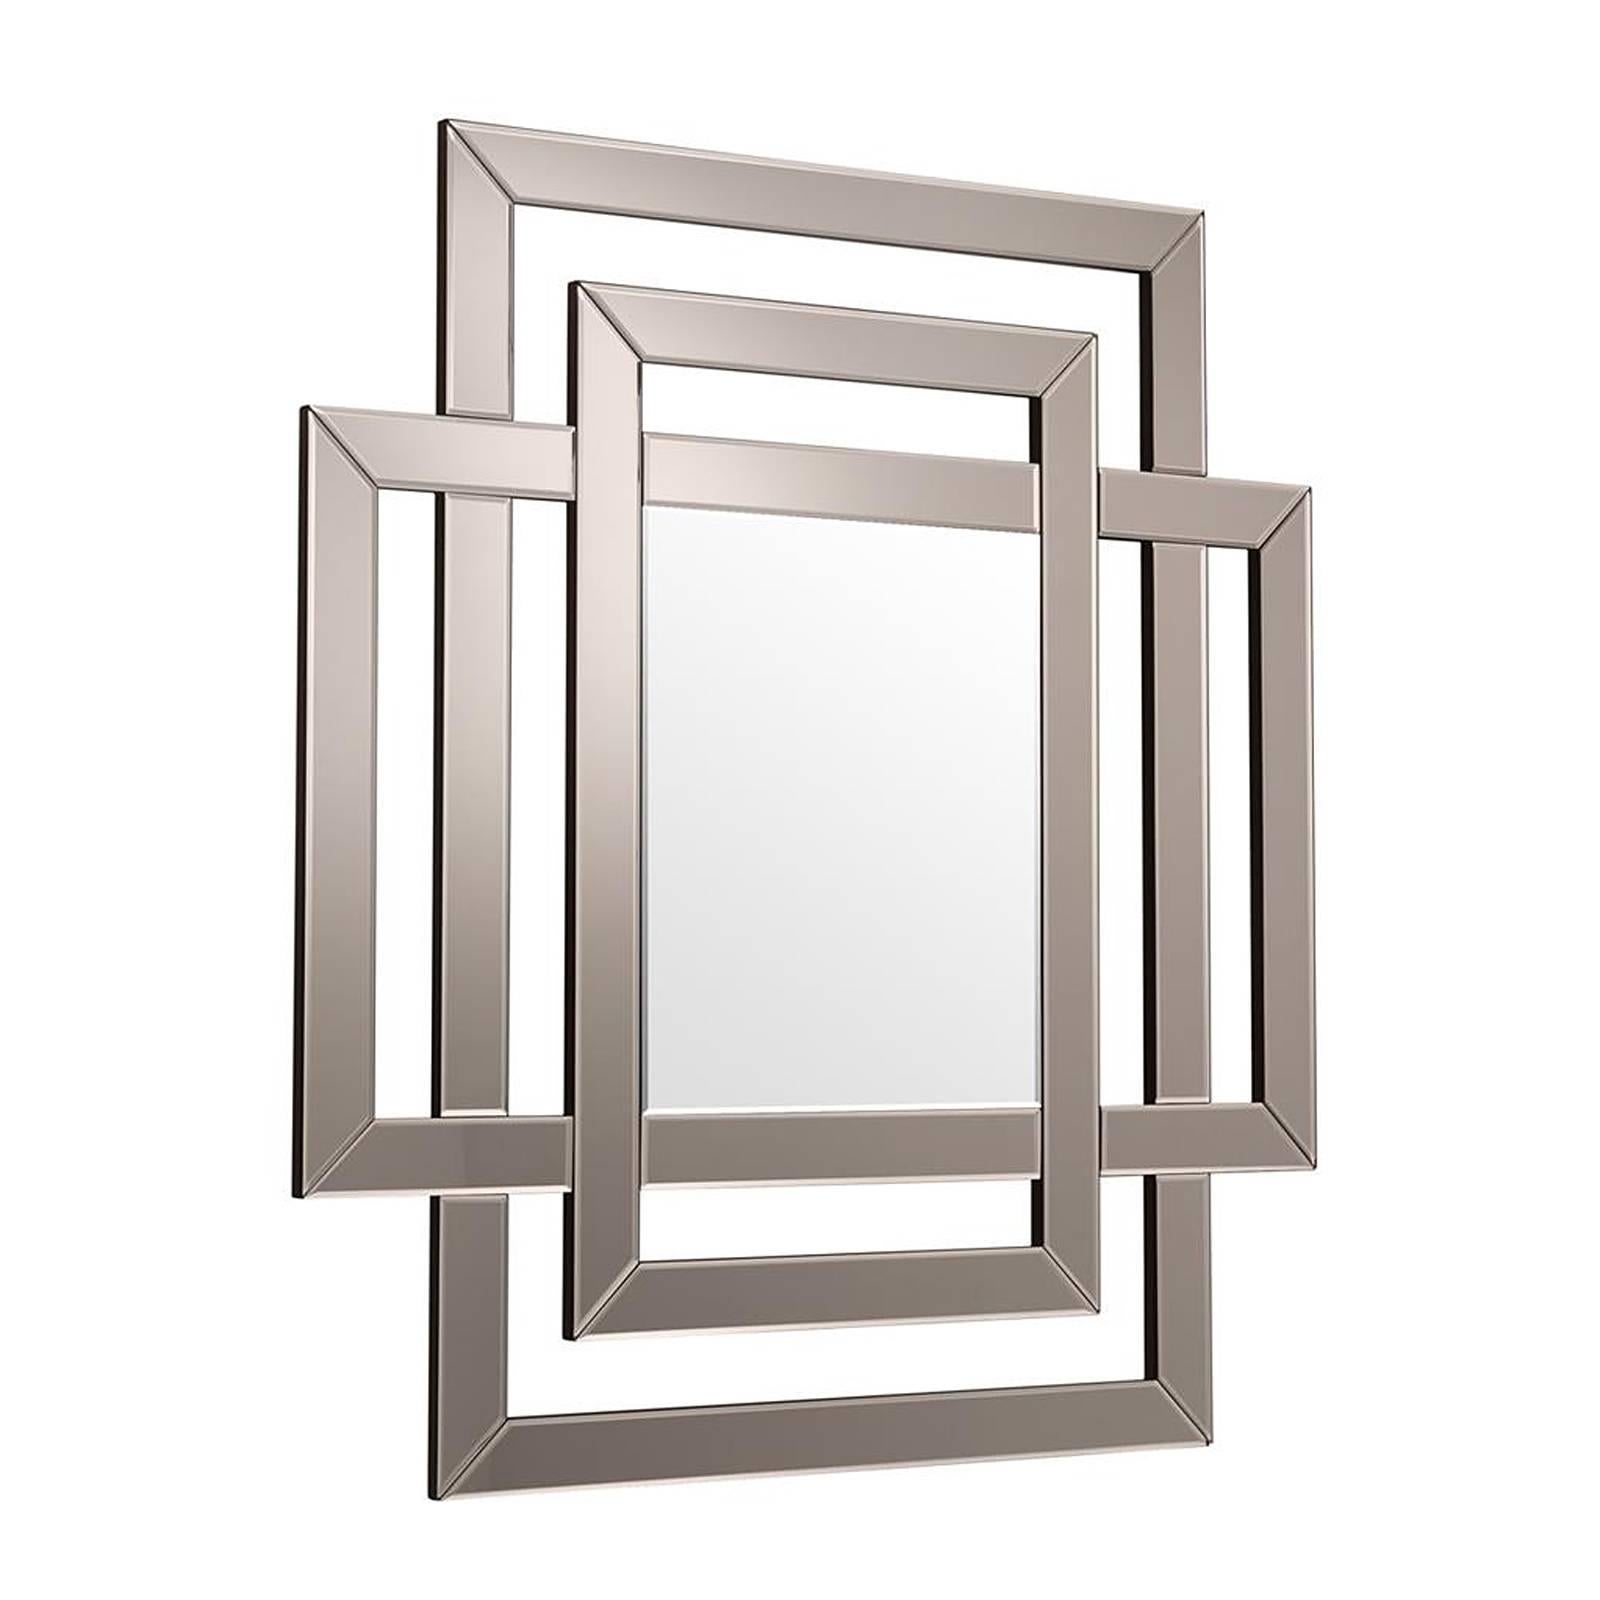 Mirror Vintus in bronze mirror glass finish.
With bevelled mirror glass.
Also available in clear mirror glass, with
bevelled mirror glass.
